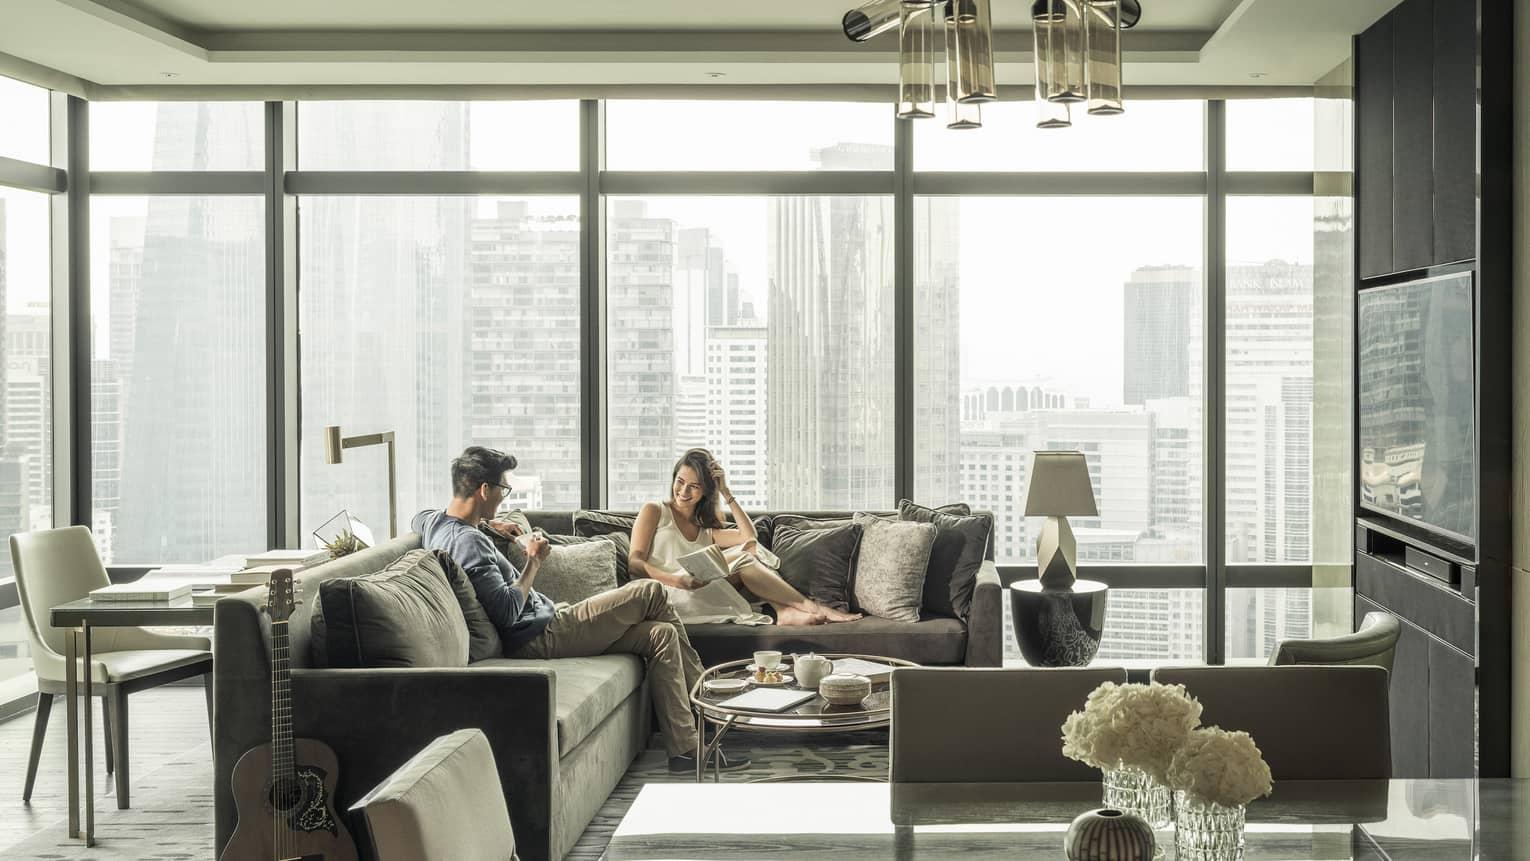 Couple relaxes on sofas in hotel suite with bright floor to ceiling windows